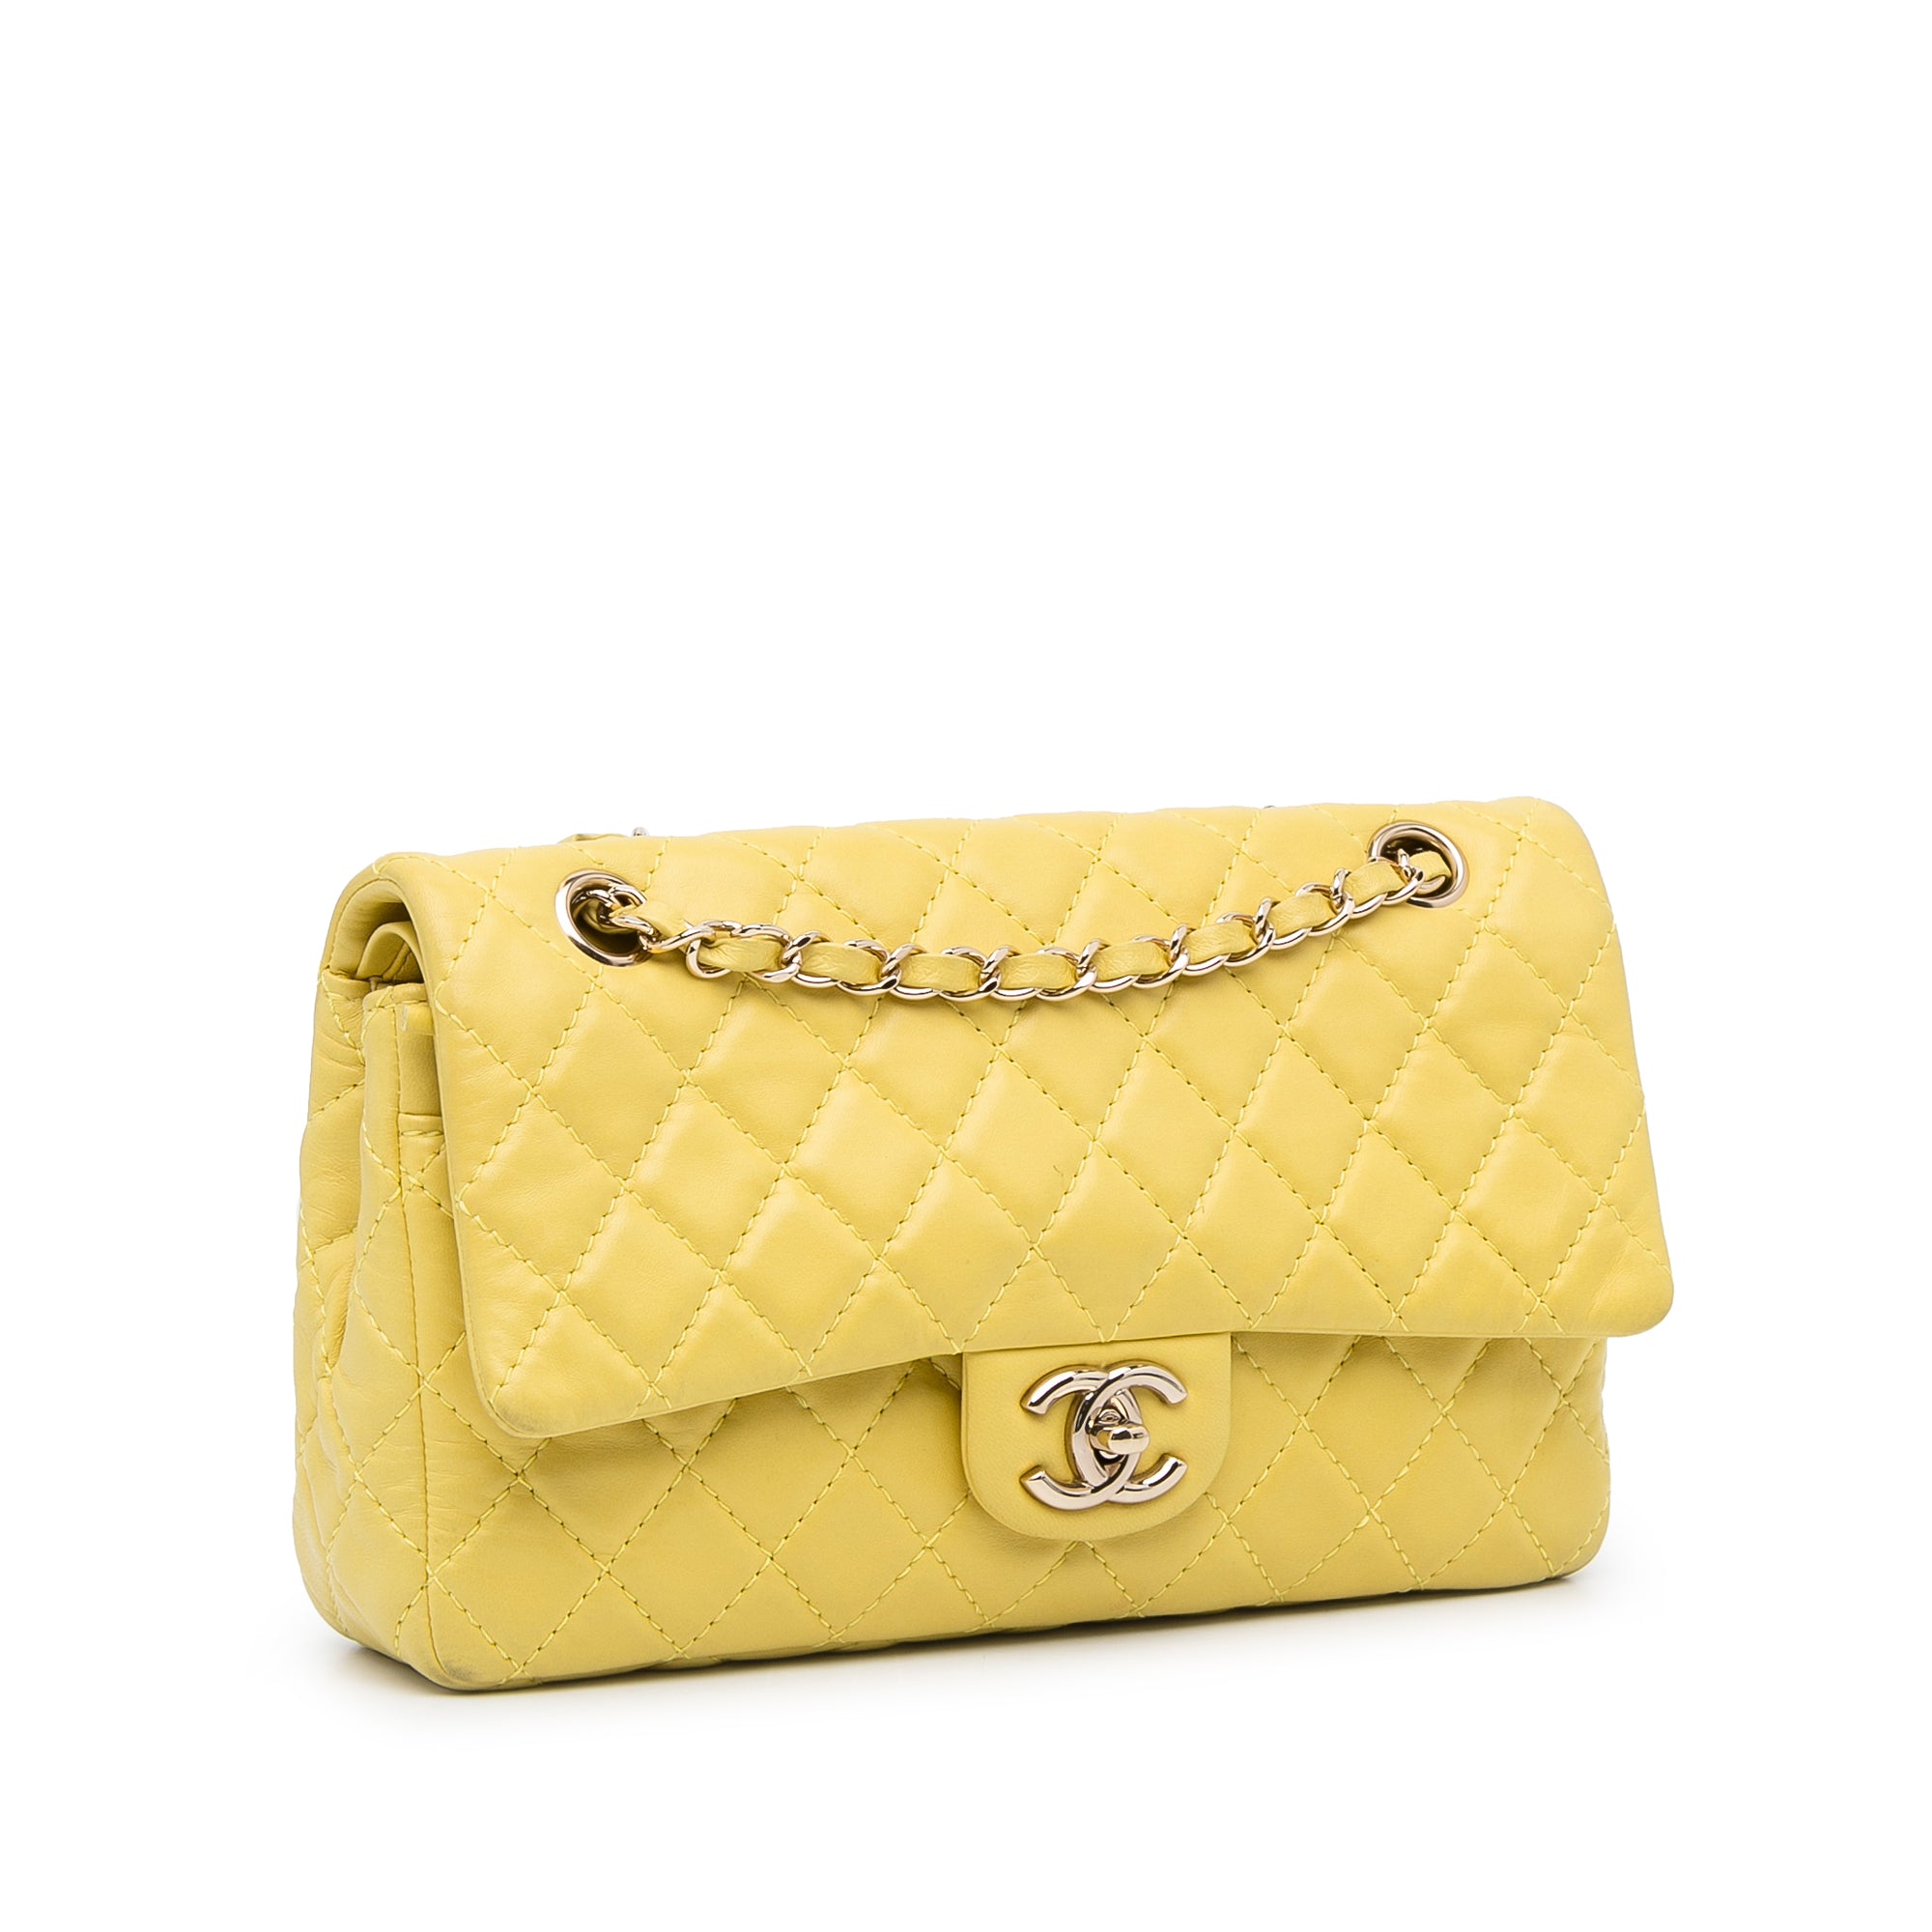 Chanel Pre-Owned 1995 small Diana shoulder bag